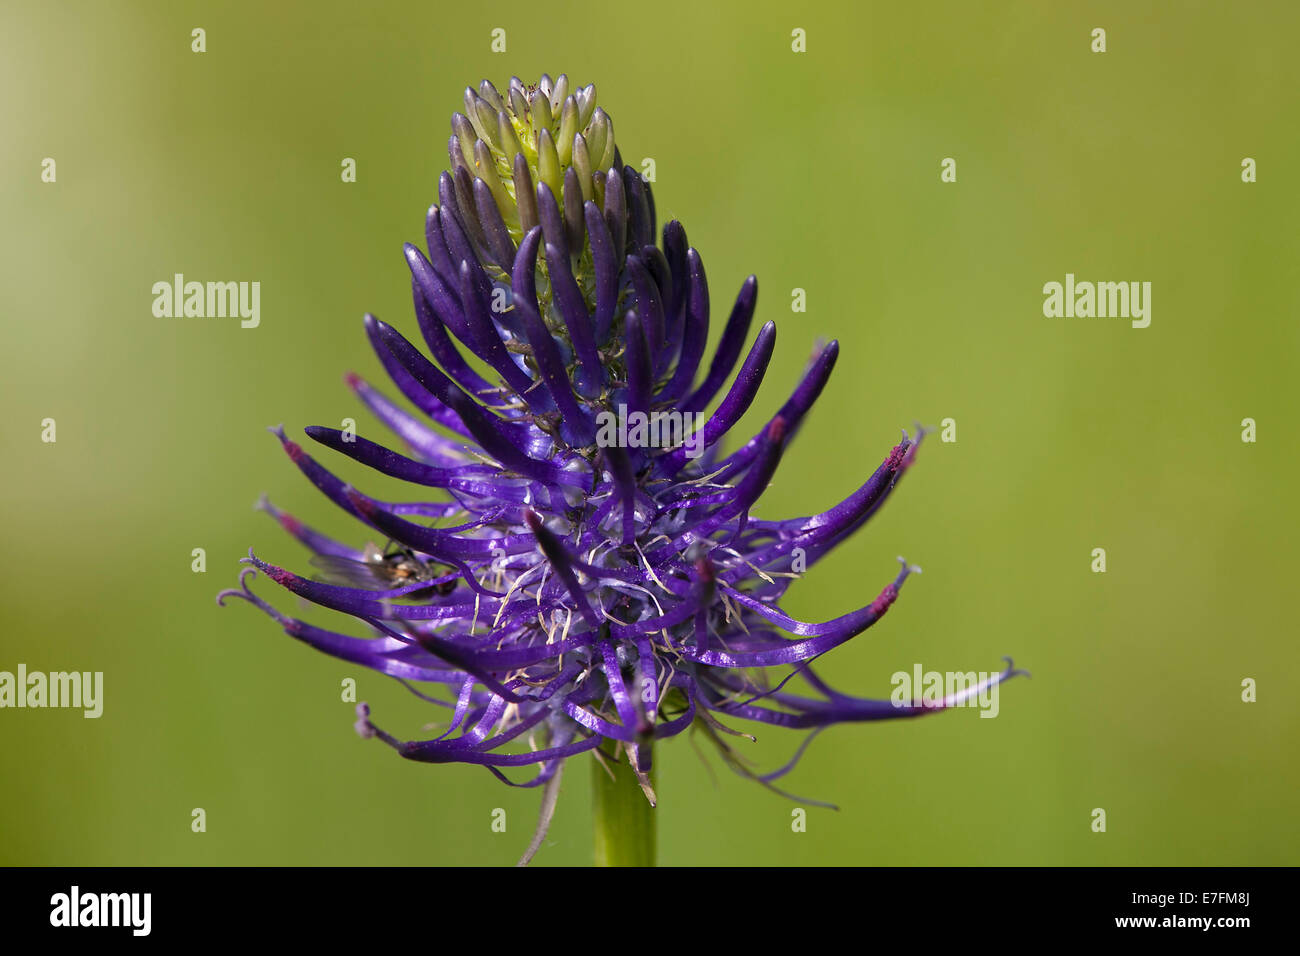 Round-headed rampion / Pride of Sussex (Phyteuma orbiculare) in flower Stock Photo